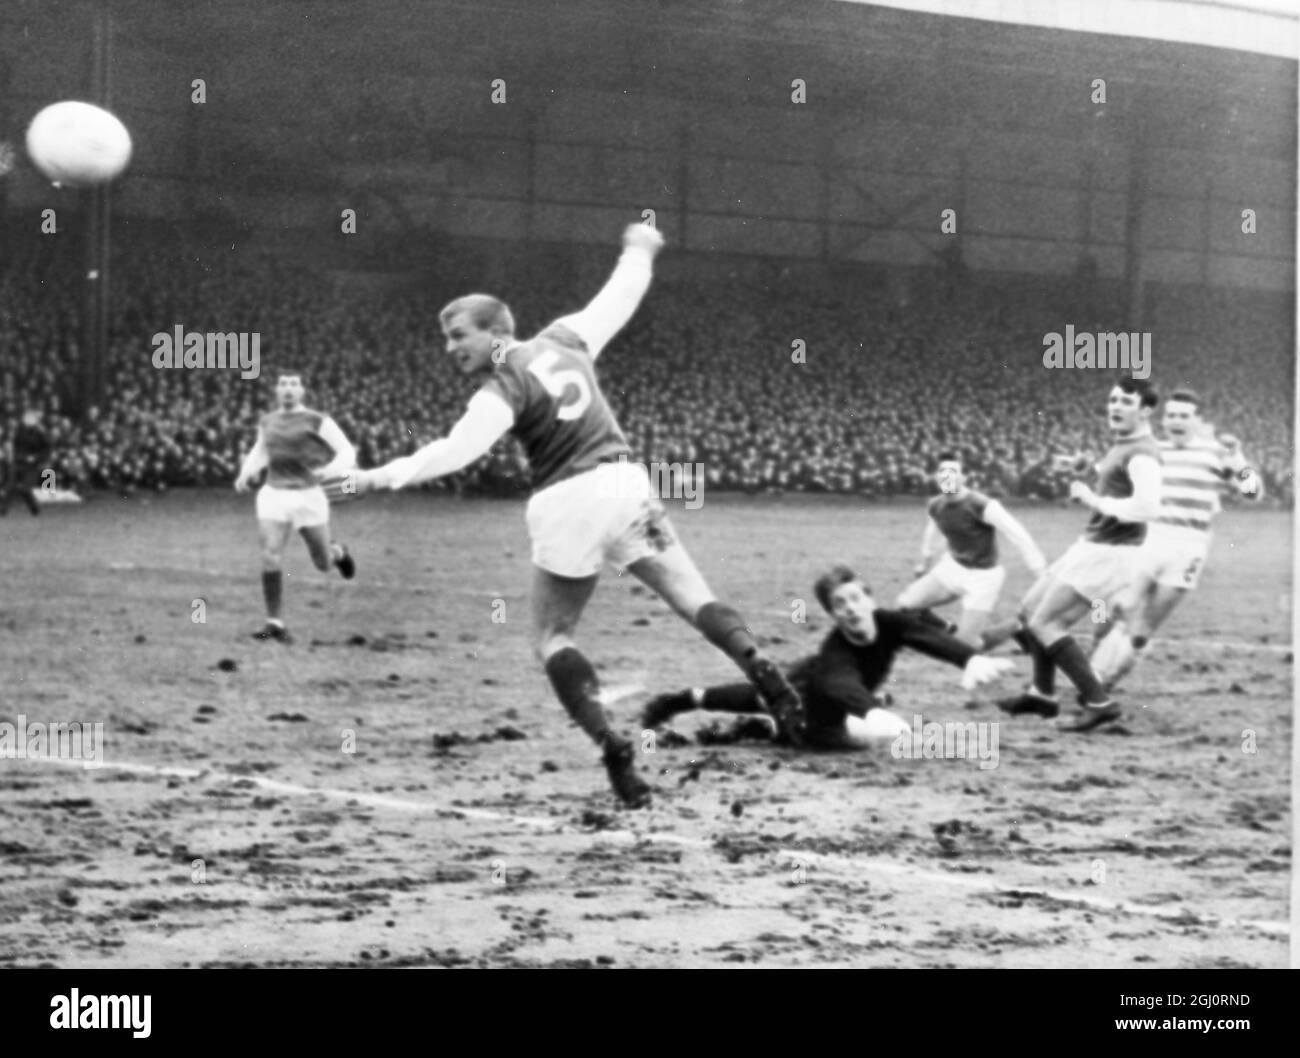 Willie Wallace (extreme right, stripes) scores Glasgow Celtic's first goal against Hibernian at Parkhead, January 21 Celtic won by two goals to nil 23 January 1967 Stock Photo